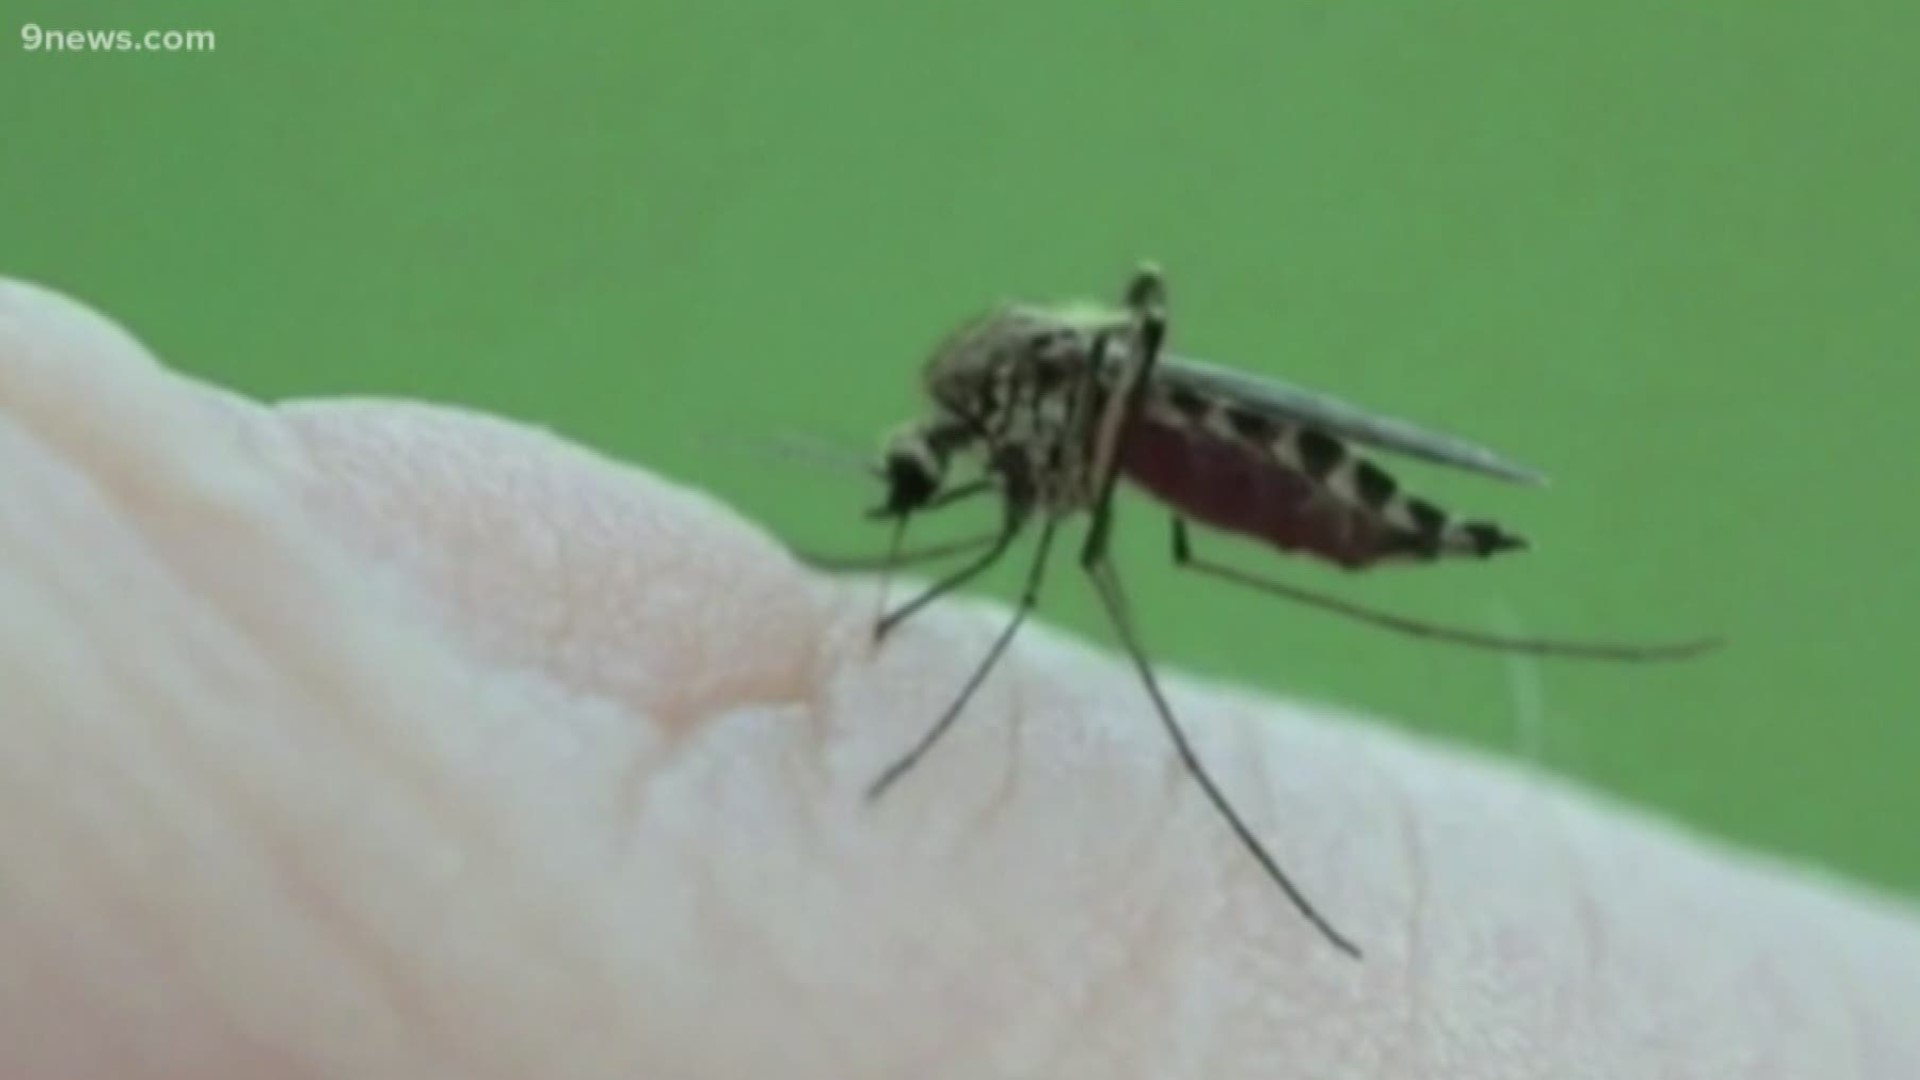 Mosquitoes infected with the West Nile virus have been found in Thornton, the Tri-County Health Department confirmed. These are the first mosquitoes that have tested positive for the virus in Adams County this year, a release from the department says. There have not been any human cases of West Nile reported.